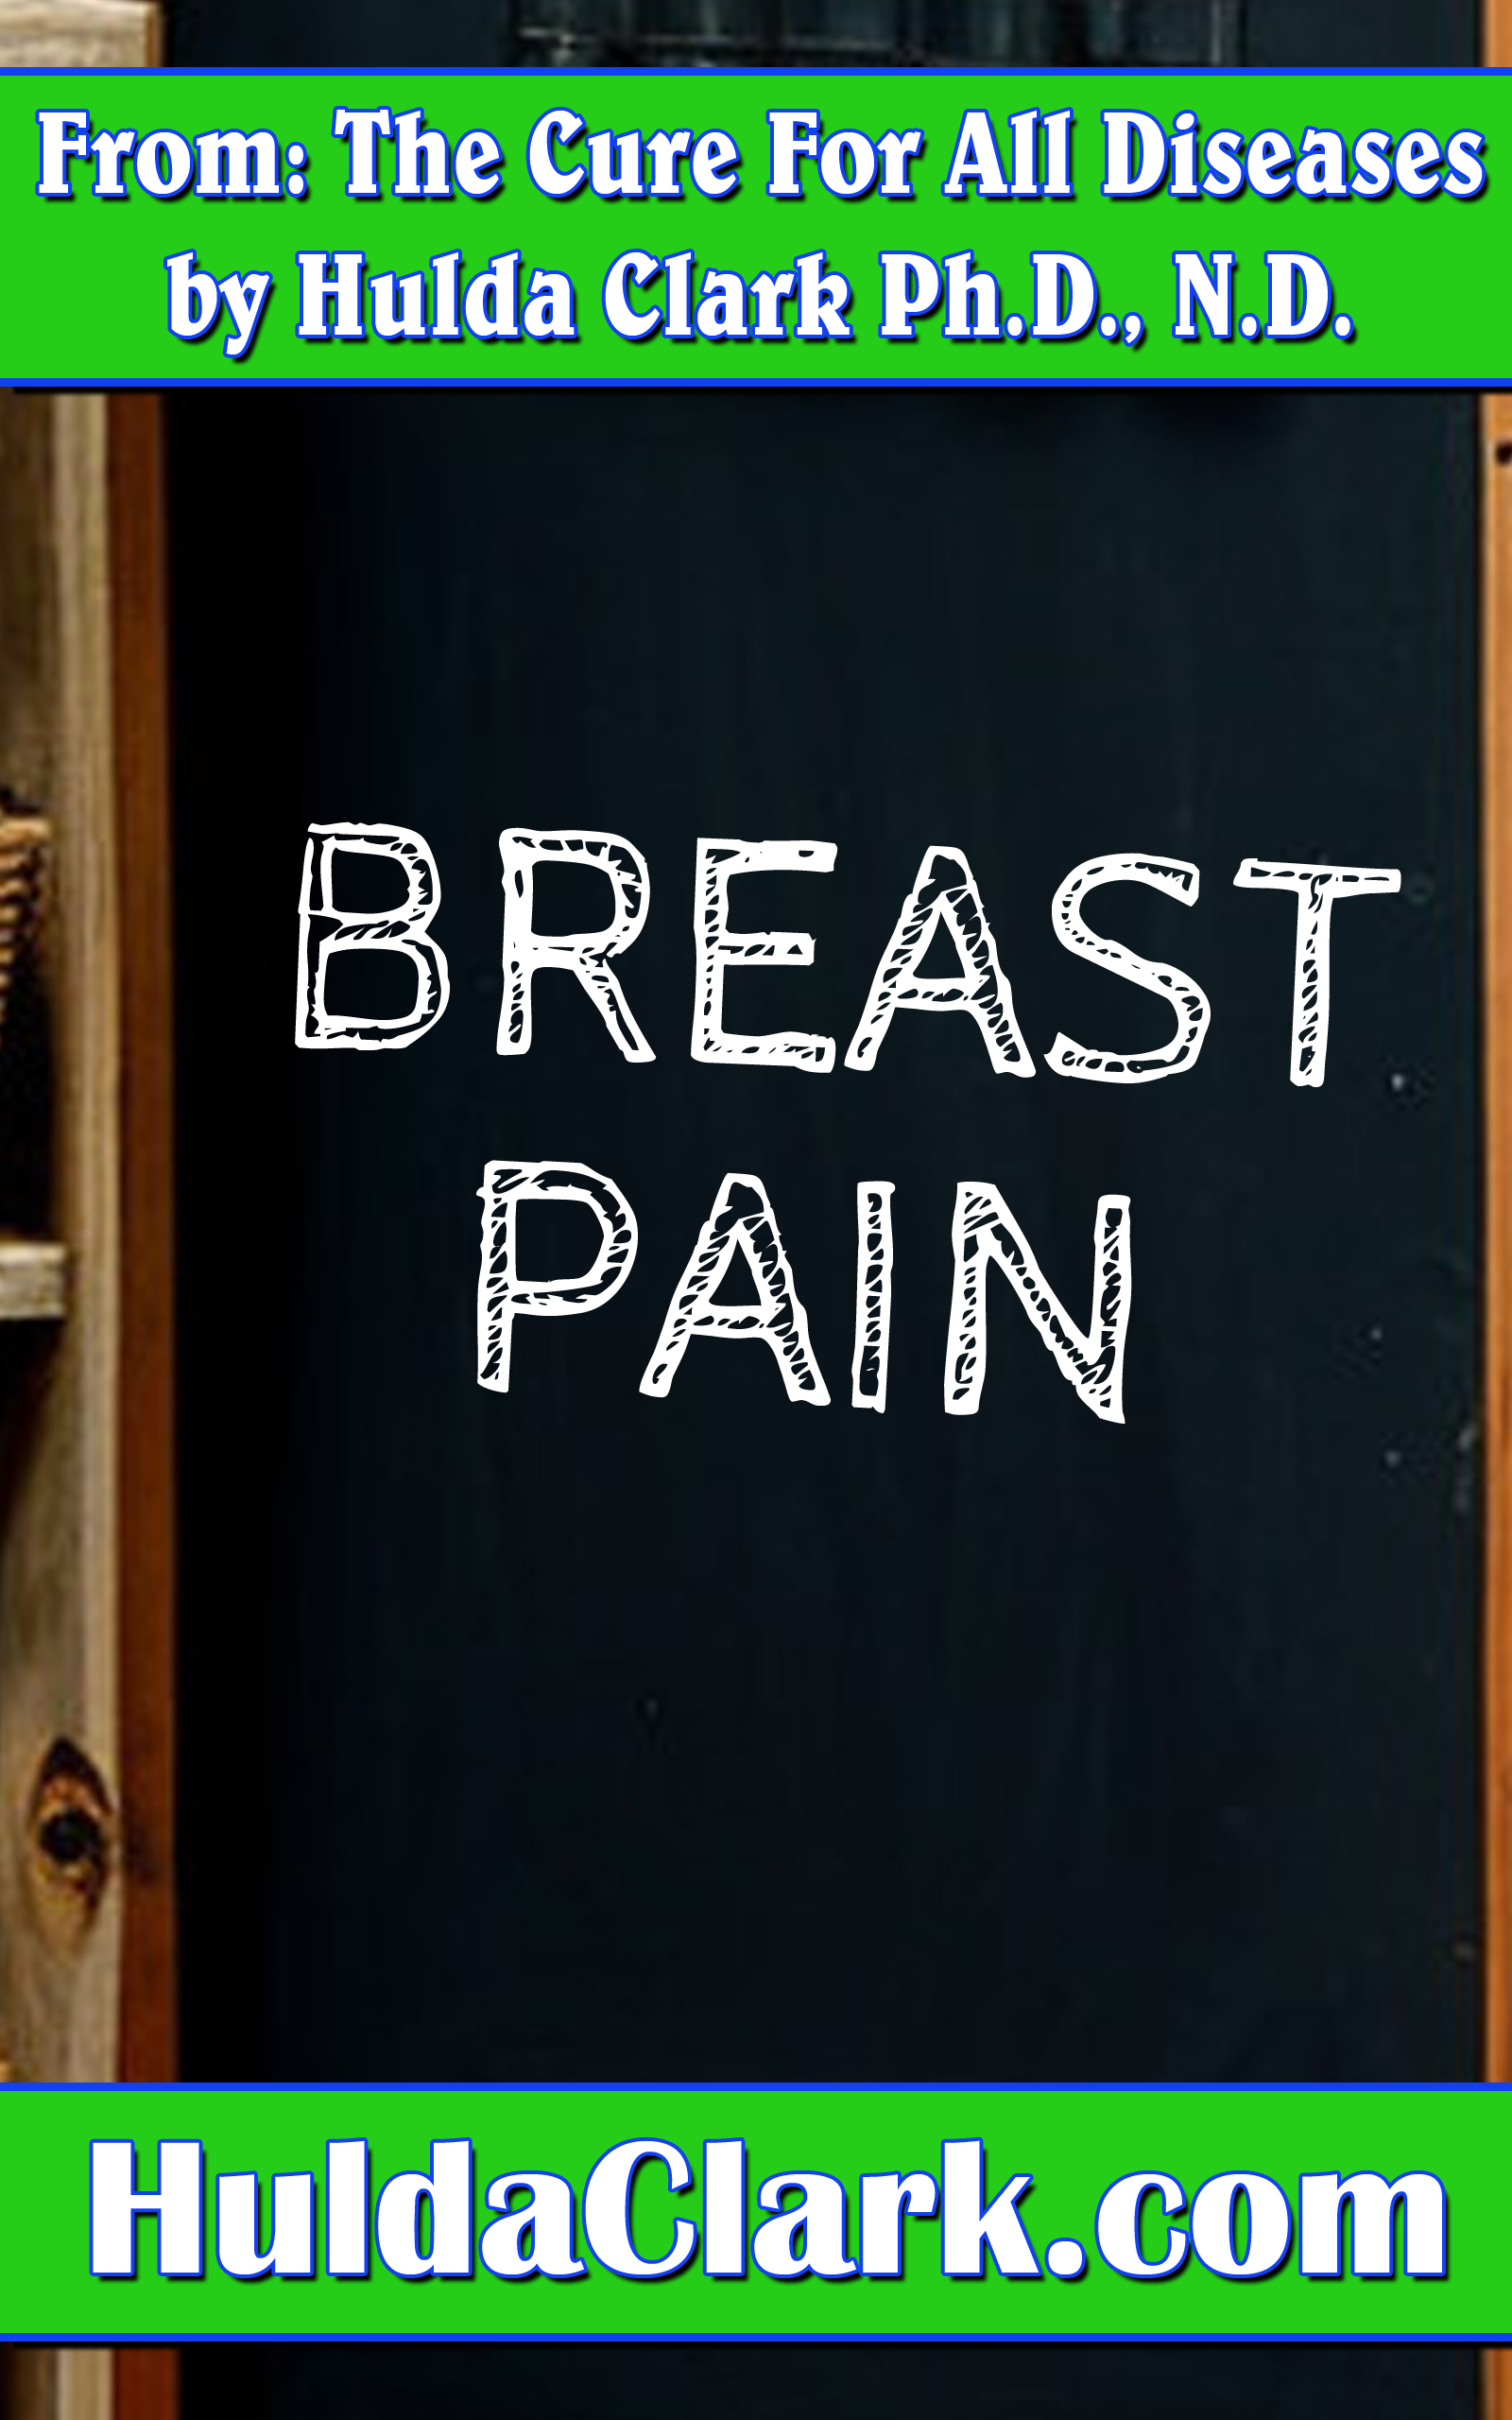 Breast Pain Ebook excerpt from The Cure for All Diseases by Hulda Clark